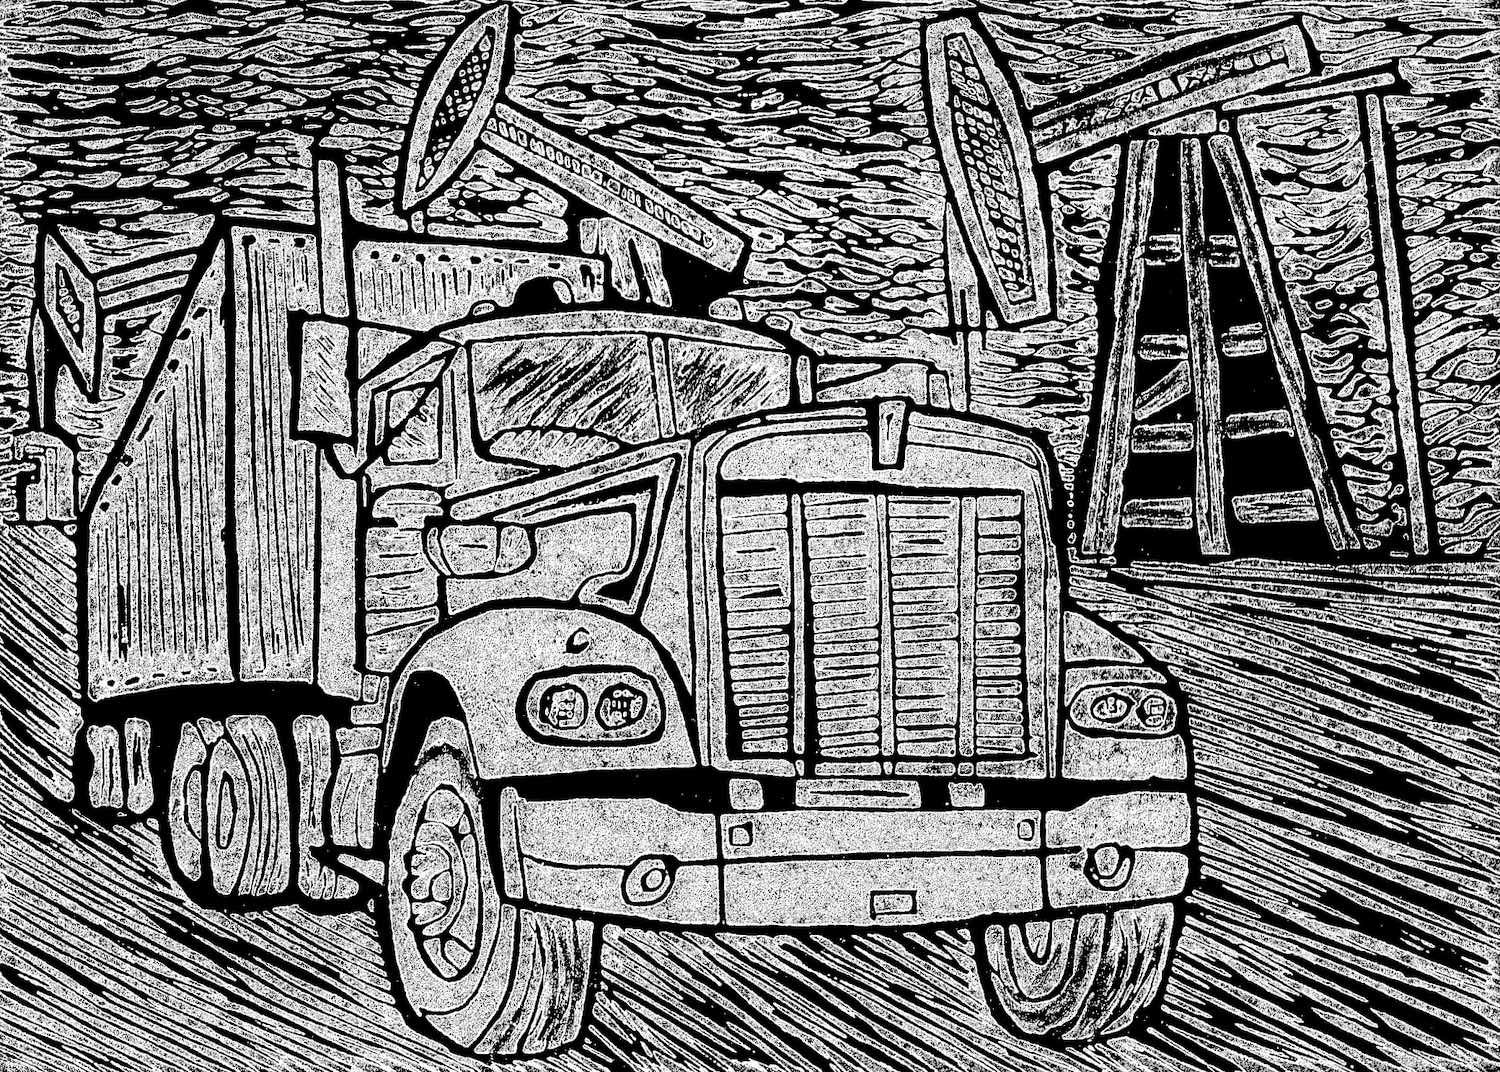 Truck and oil pump rigs block prints by Charly Fasano.